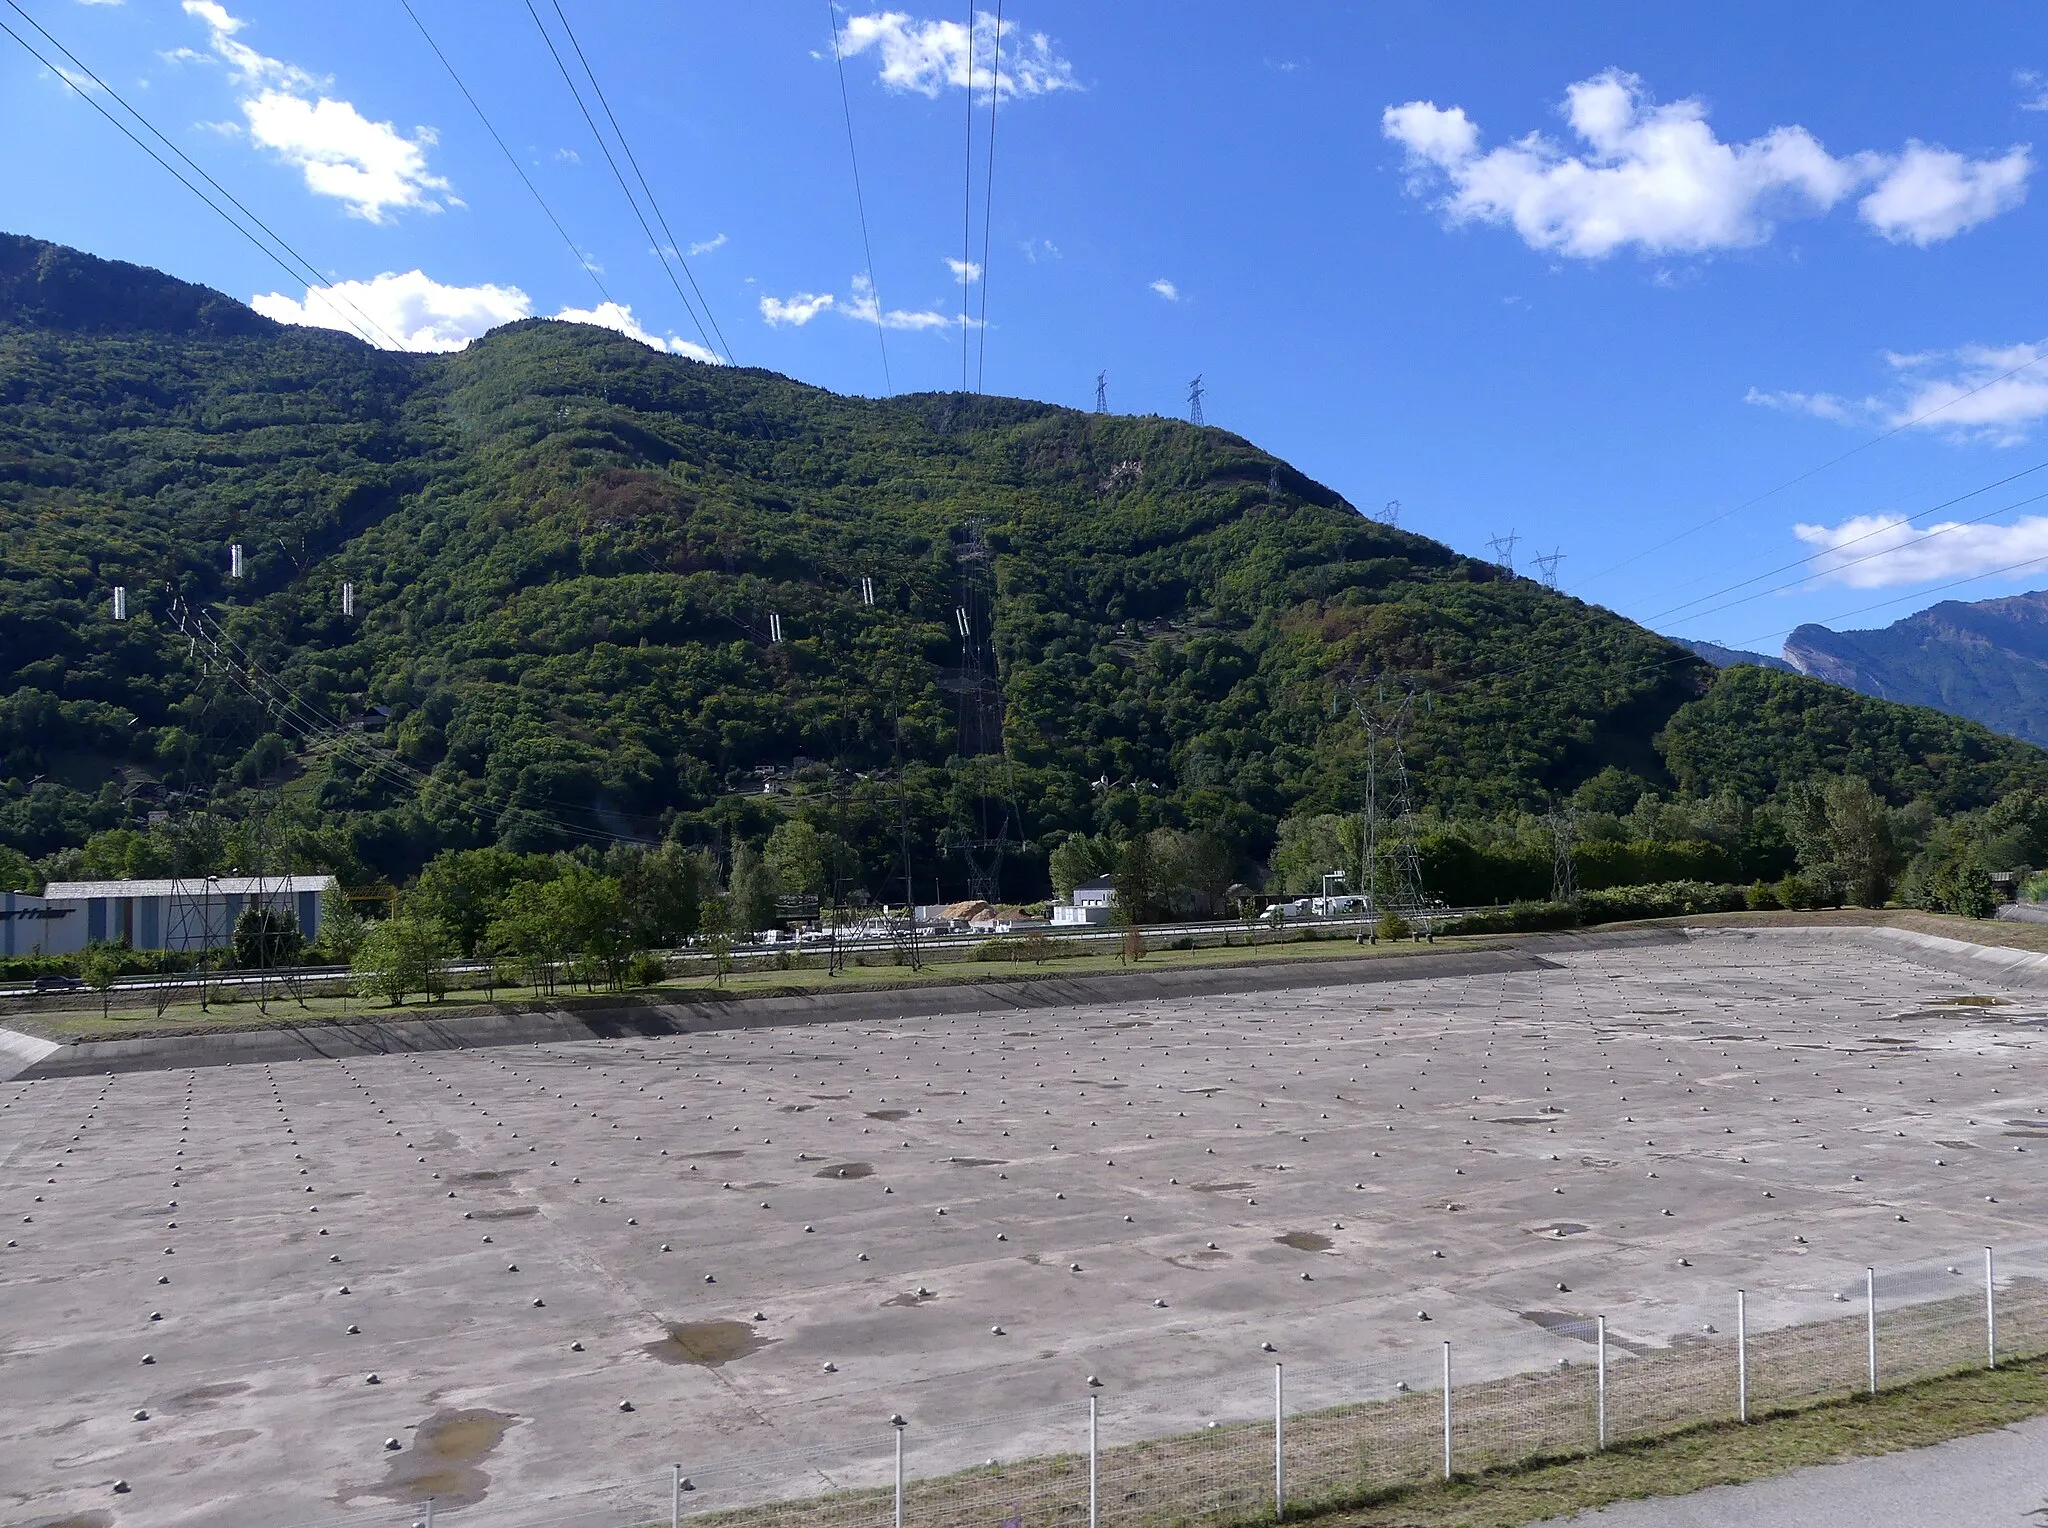 Photo showing: Sight, from Tarentaise railway line, of the stilling basin of La Bâthie hydroelectric power station, near Albertville, Savoie, France.